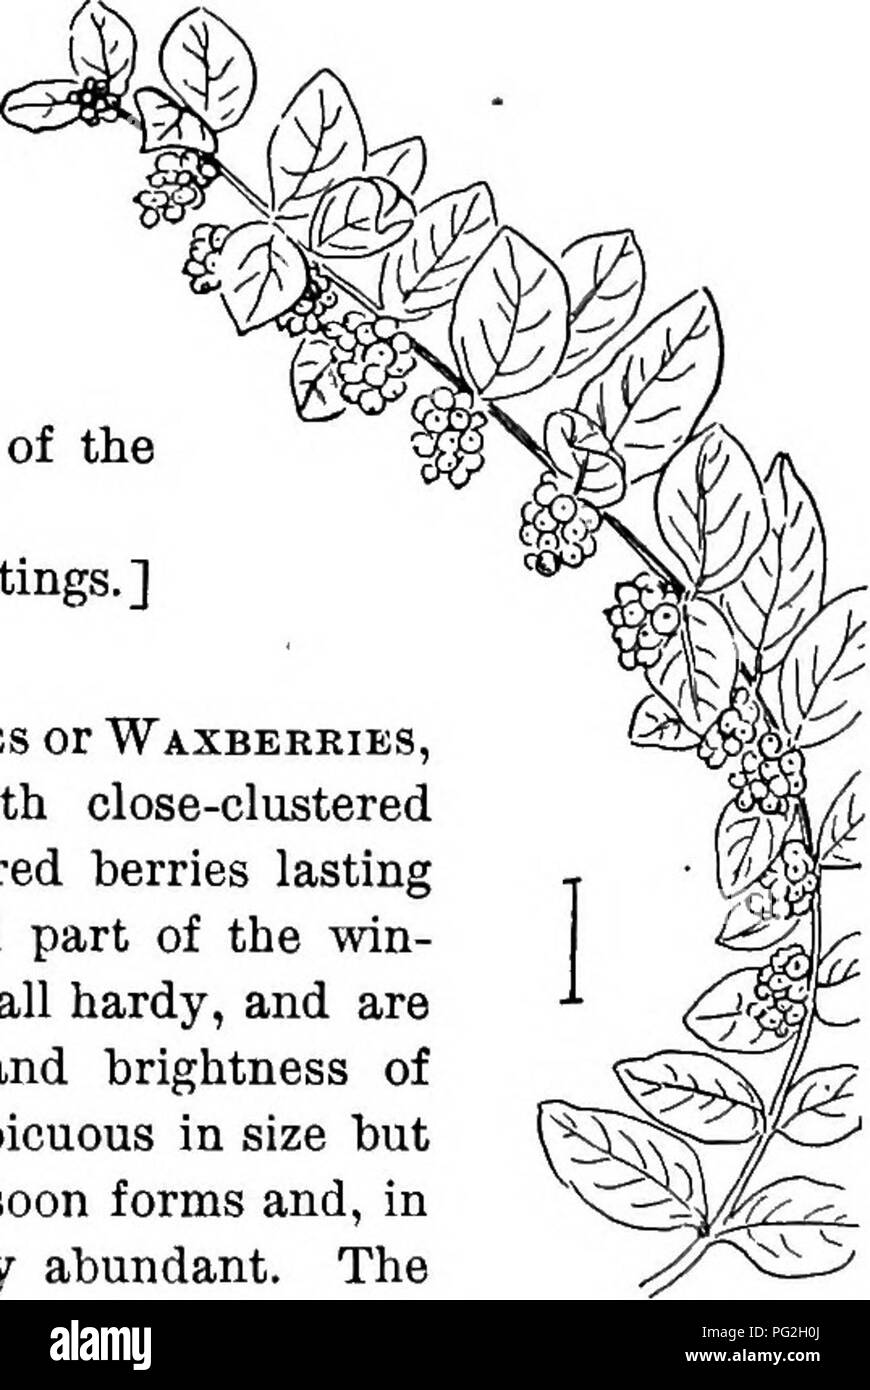 . Ornamental shrubs of the United States (hardy, cultivated). Shrubs. Fig. 371. — American Elder. Fig. 372. — Golden American Elder. species. The silver-leaved, ar- g6ntea, is a variety of the European and the glaucous-leaved, glaiica, of the American. It is generally easy to determine the species by the taller growth and smaller pith of the European elder. [Eoot cuttings; tv?ig cuttings.] Symphoricdrpos. The Snowberries or 'Waxberkies, and CoRAL-BERRiKS are shrubs with close-clustered fleshy 2-seeded globular white or red berries lasting on the bushes through the fall and part of the win- ter Stock Photo